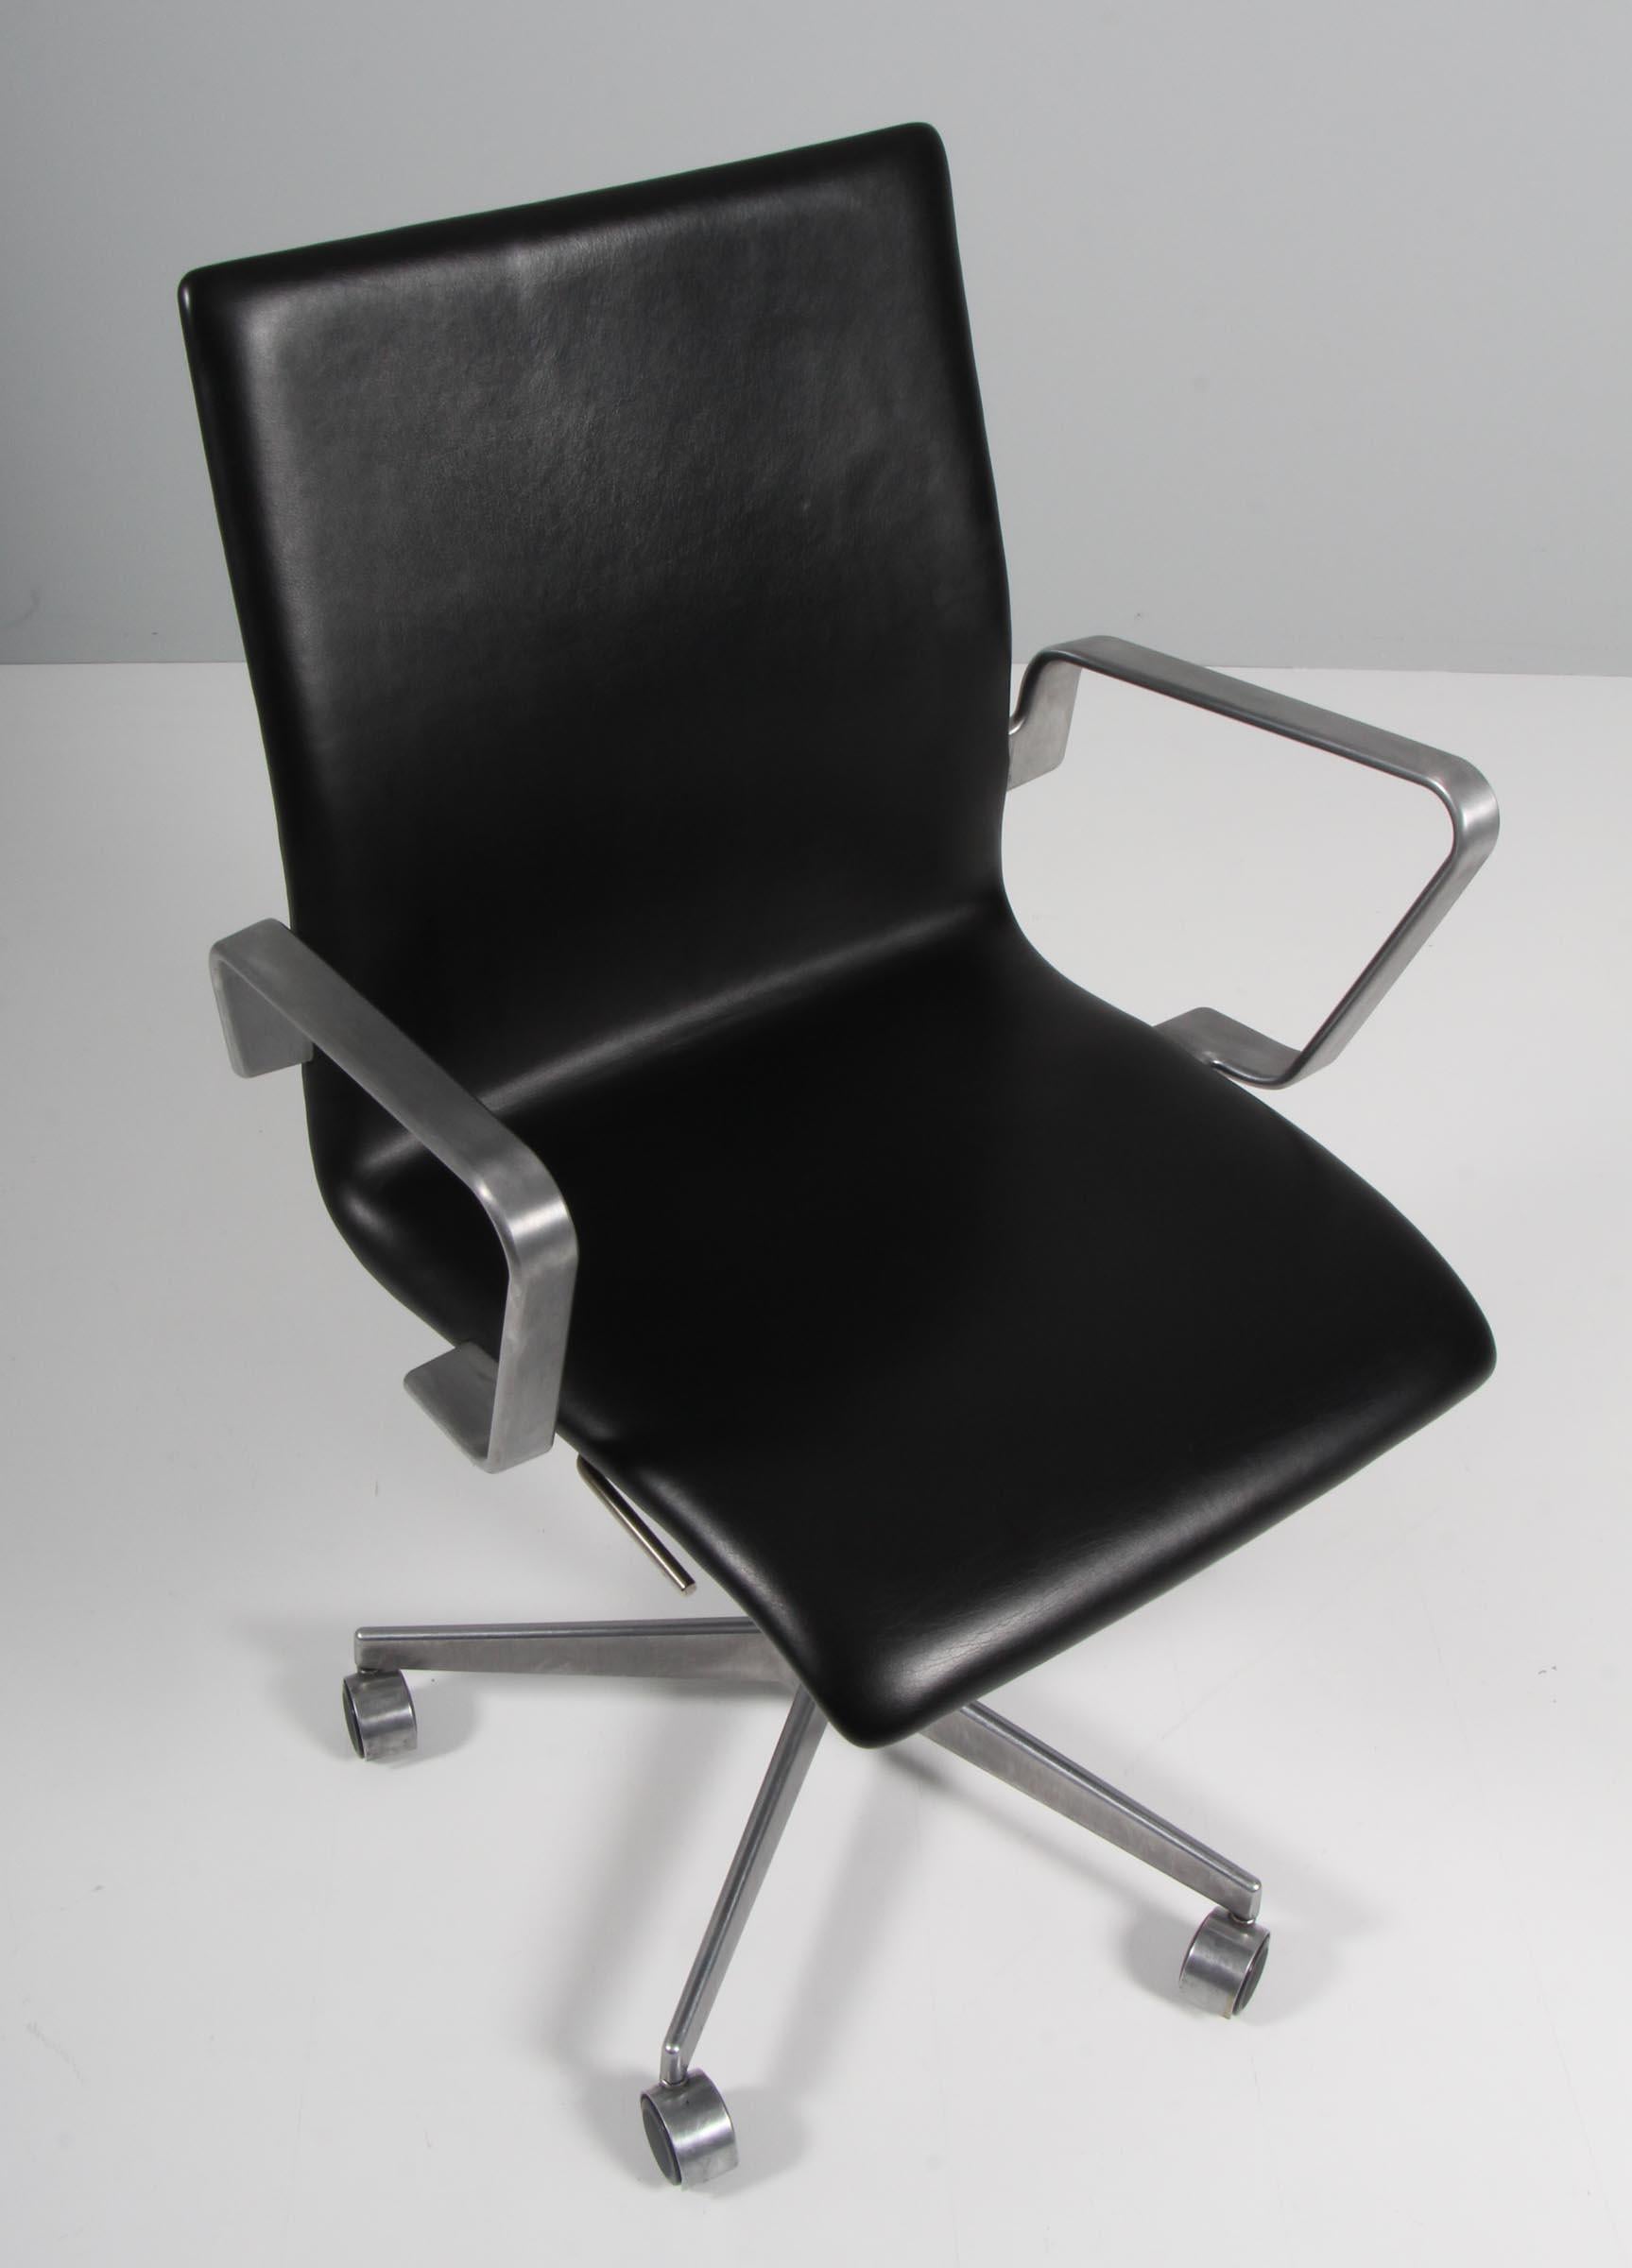 Arne Jacobsen Oxford chair five star base in aluminum. Turnable. With wheels.

Original black leather upholstery

Made by Fritz Hansen in 2006, red label

Original designed for the Oxford university.